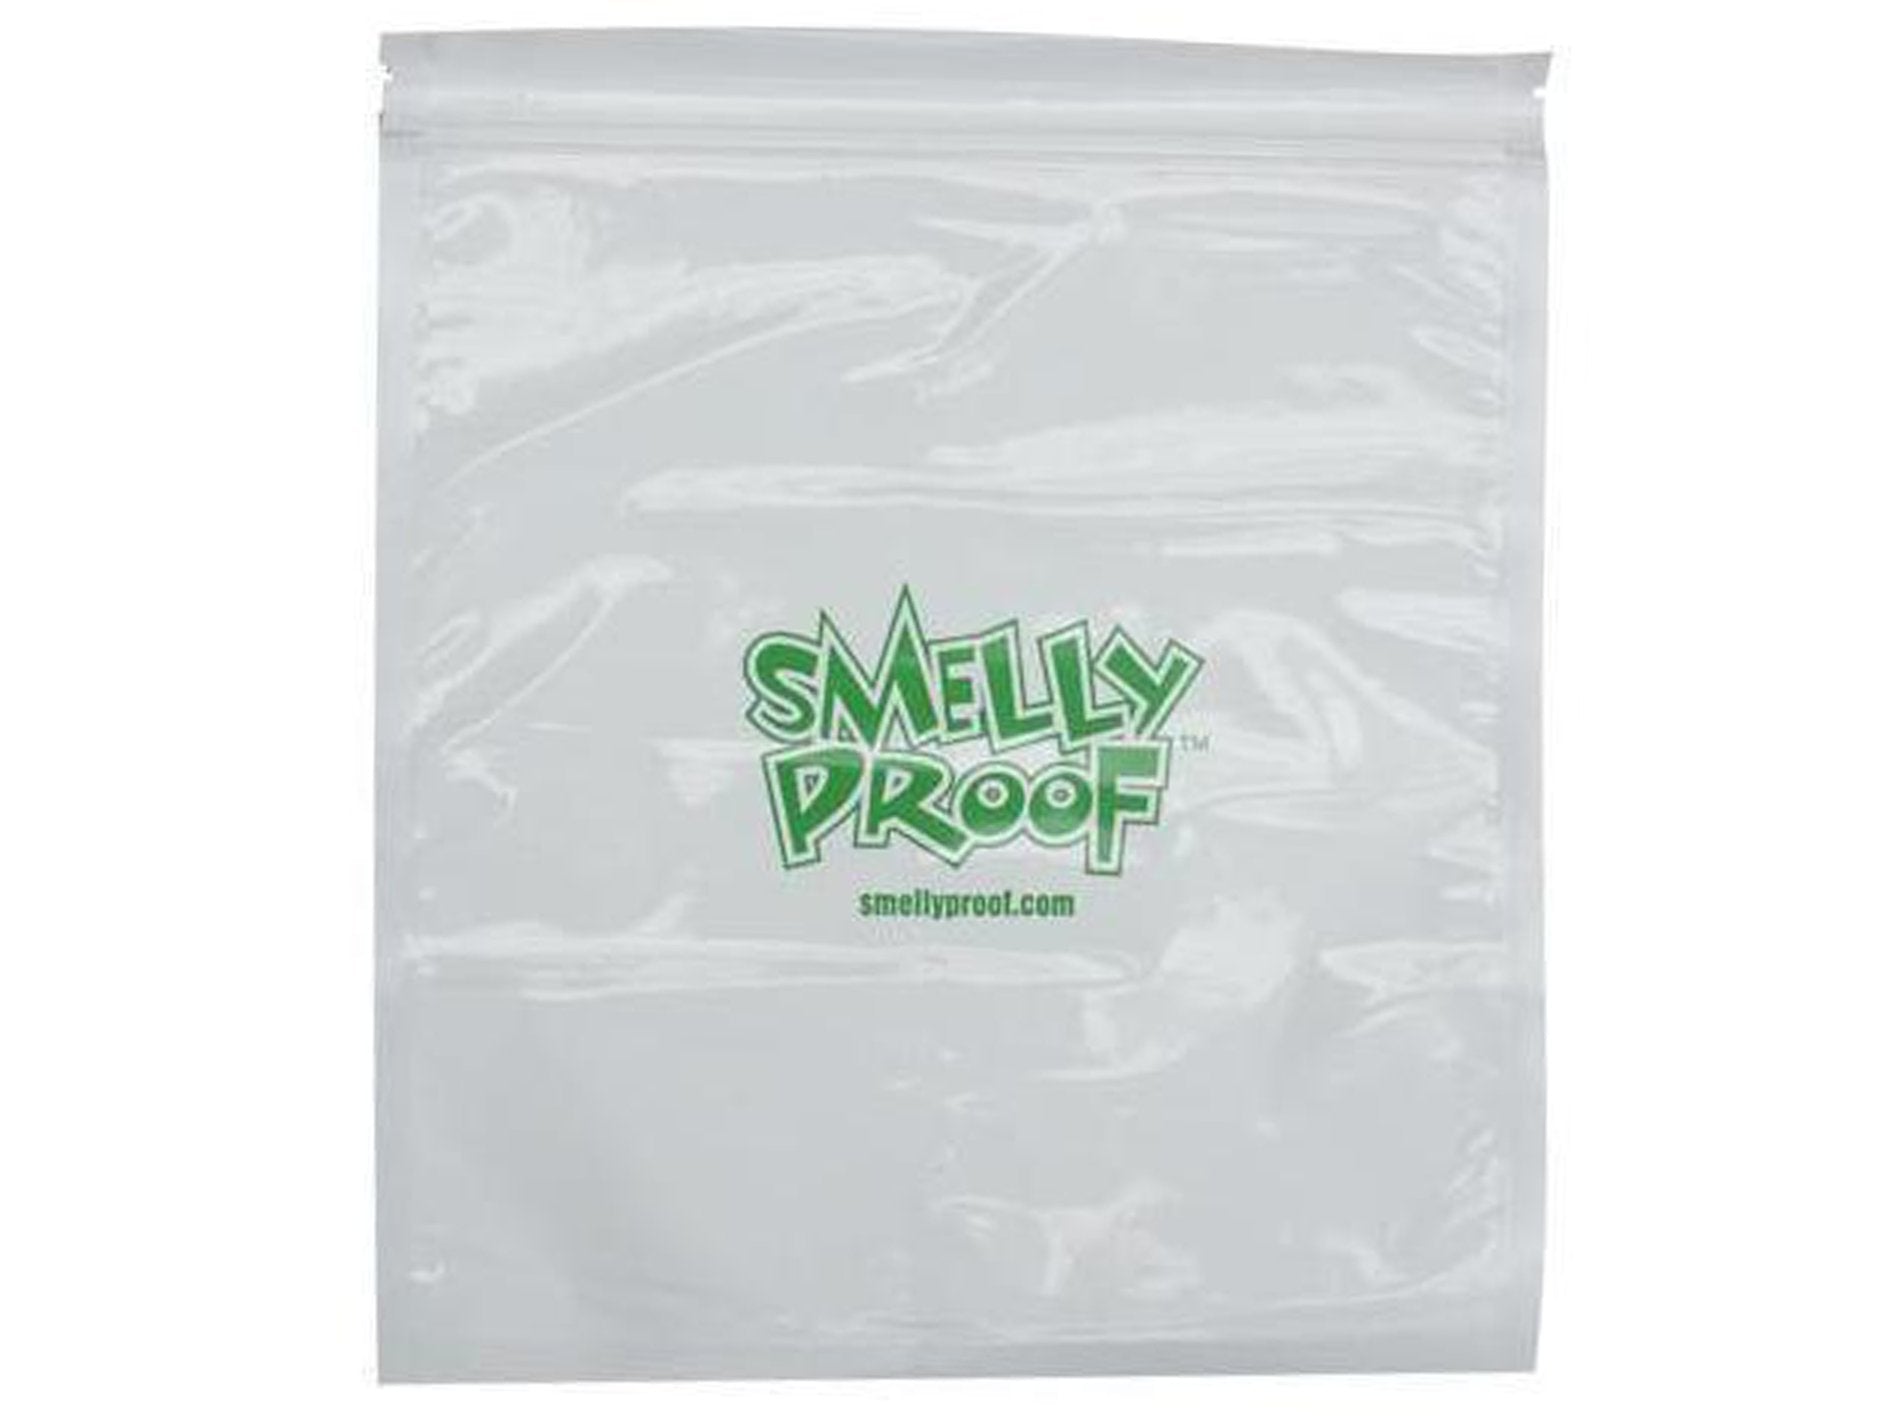 SMELLY PROOF Clear Bags 50 Pack - VIR Wholesale